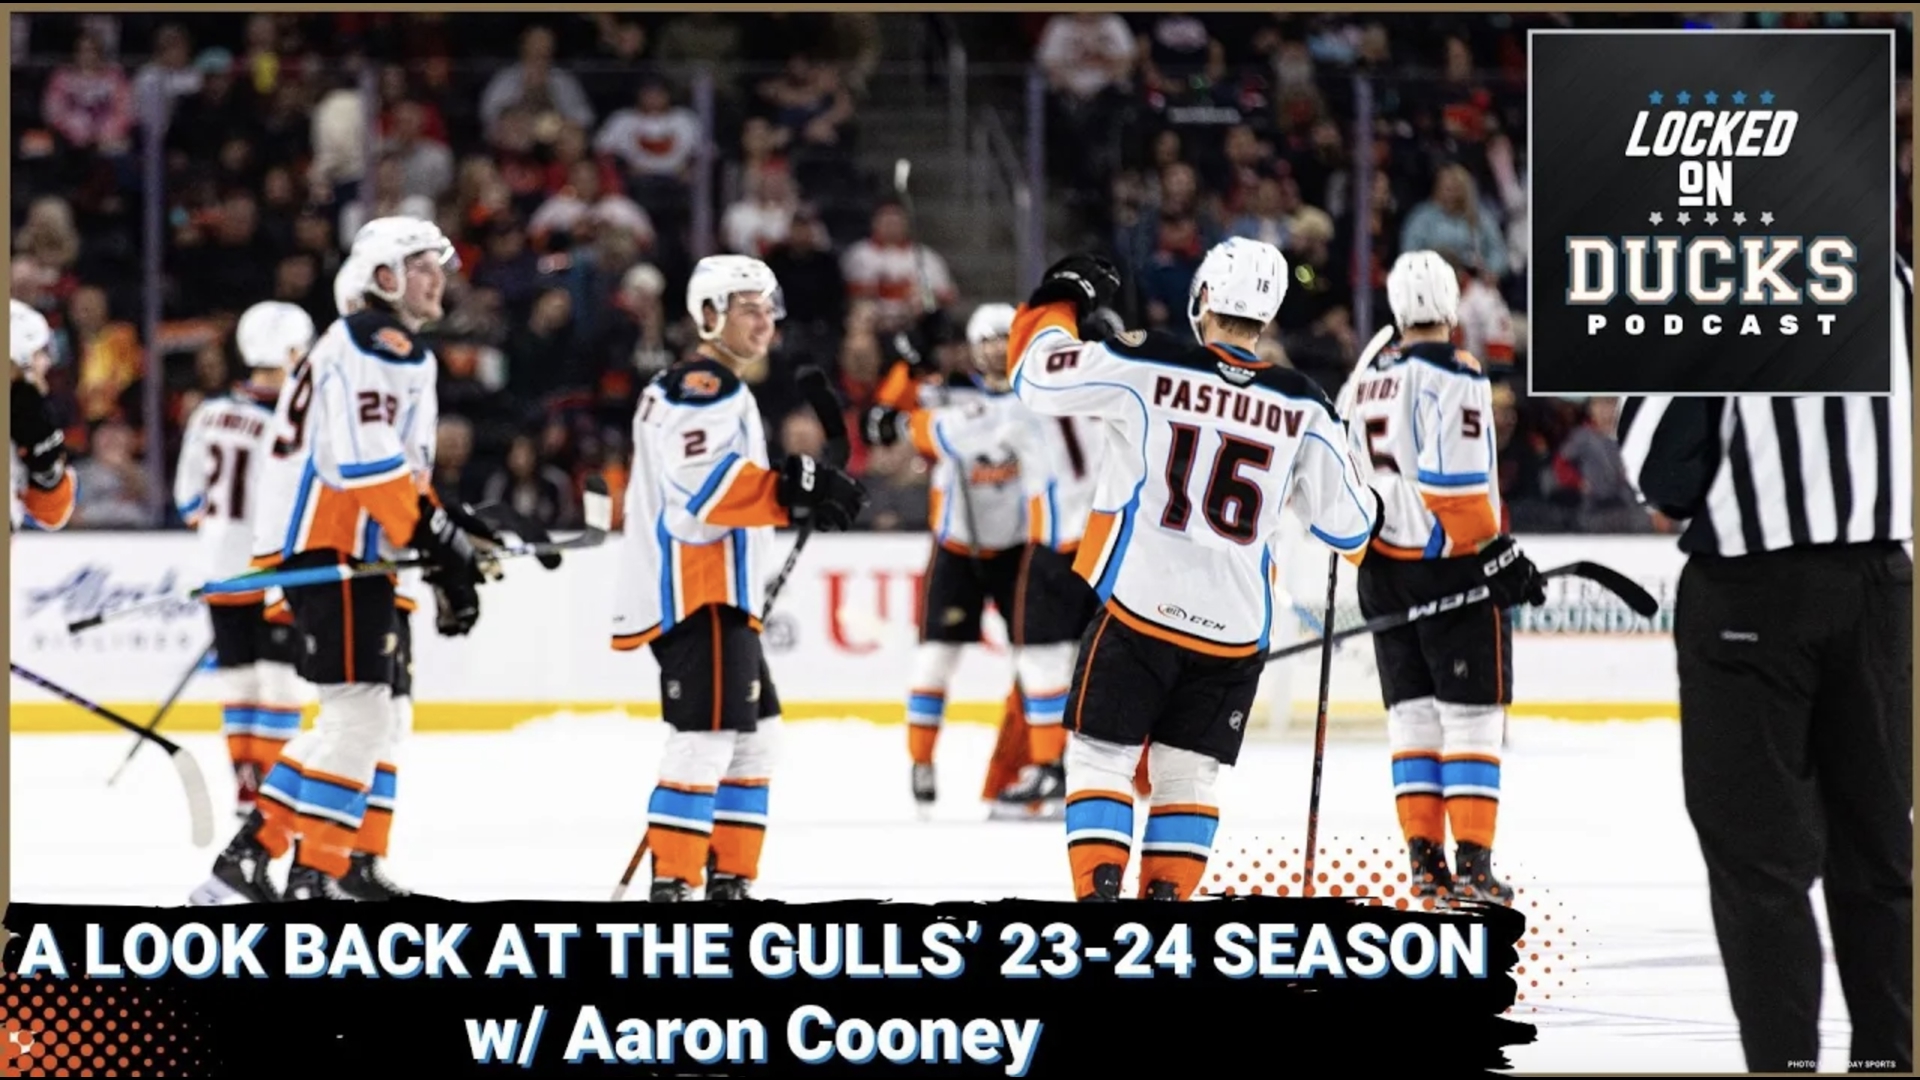 We have our season in review for the San Diego Gulls, and joining the podcast is a special guest! JD Hernandez is joined by Aaron Cooney